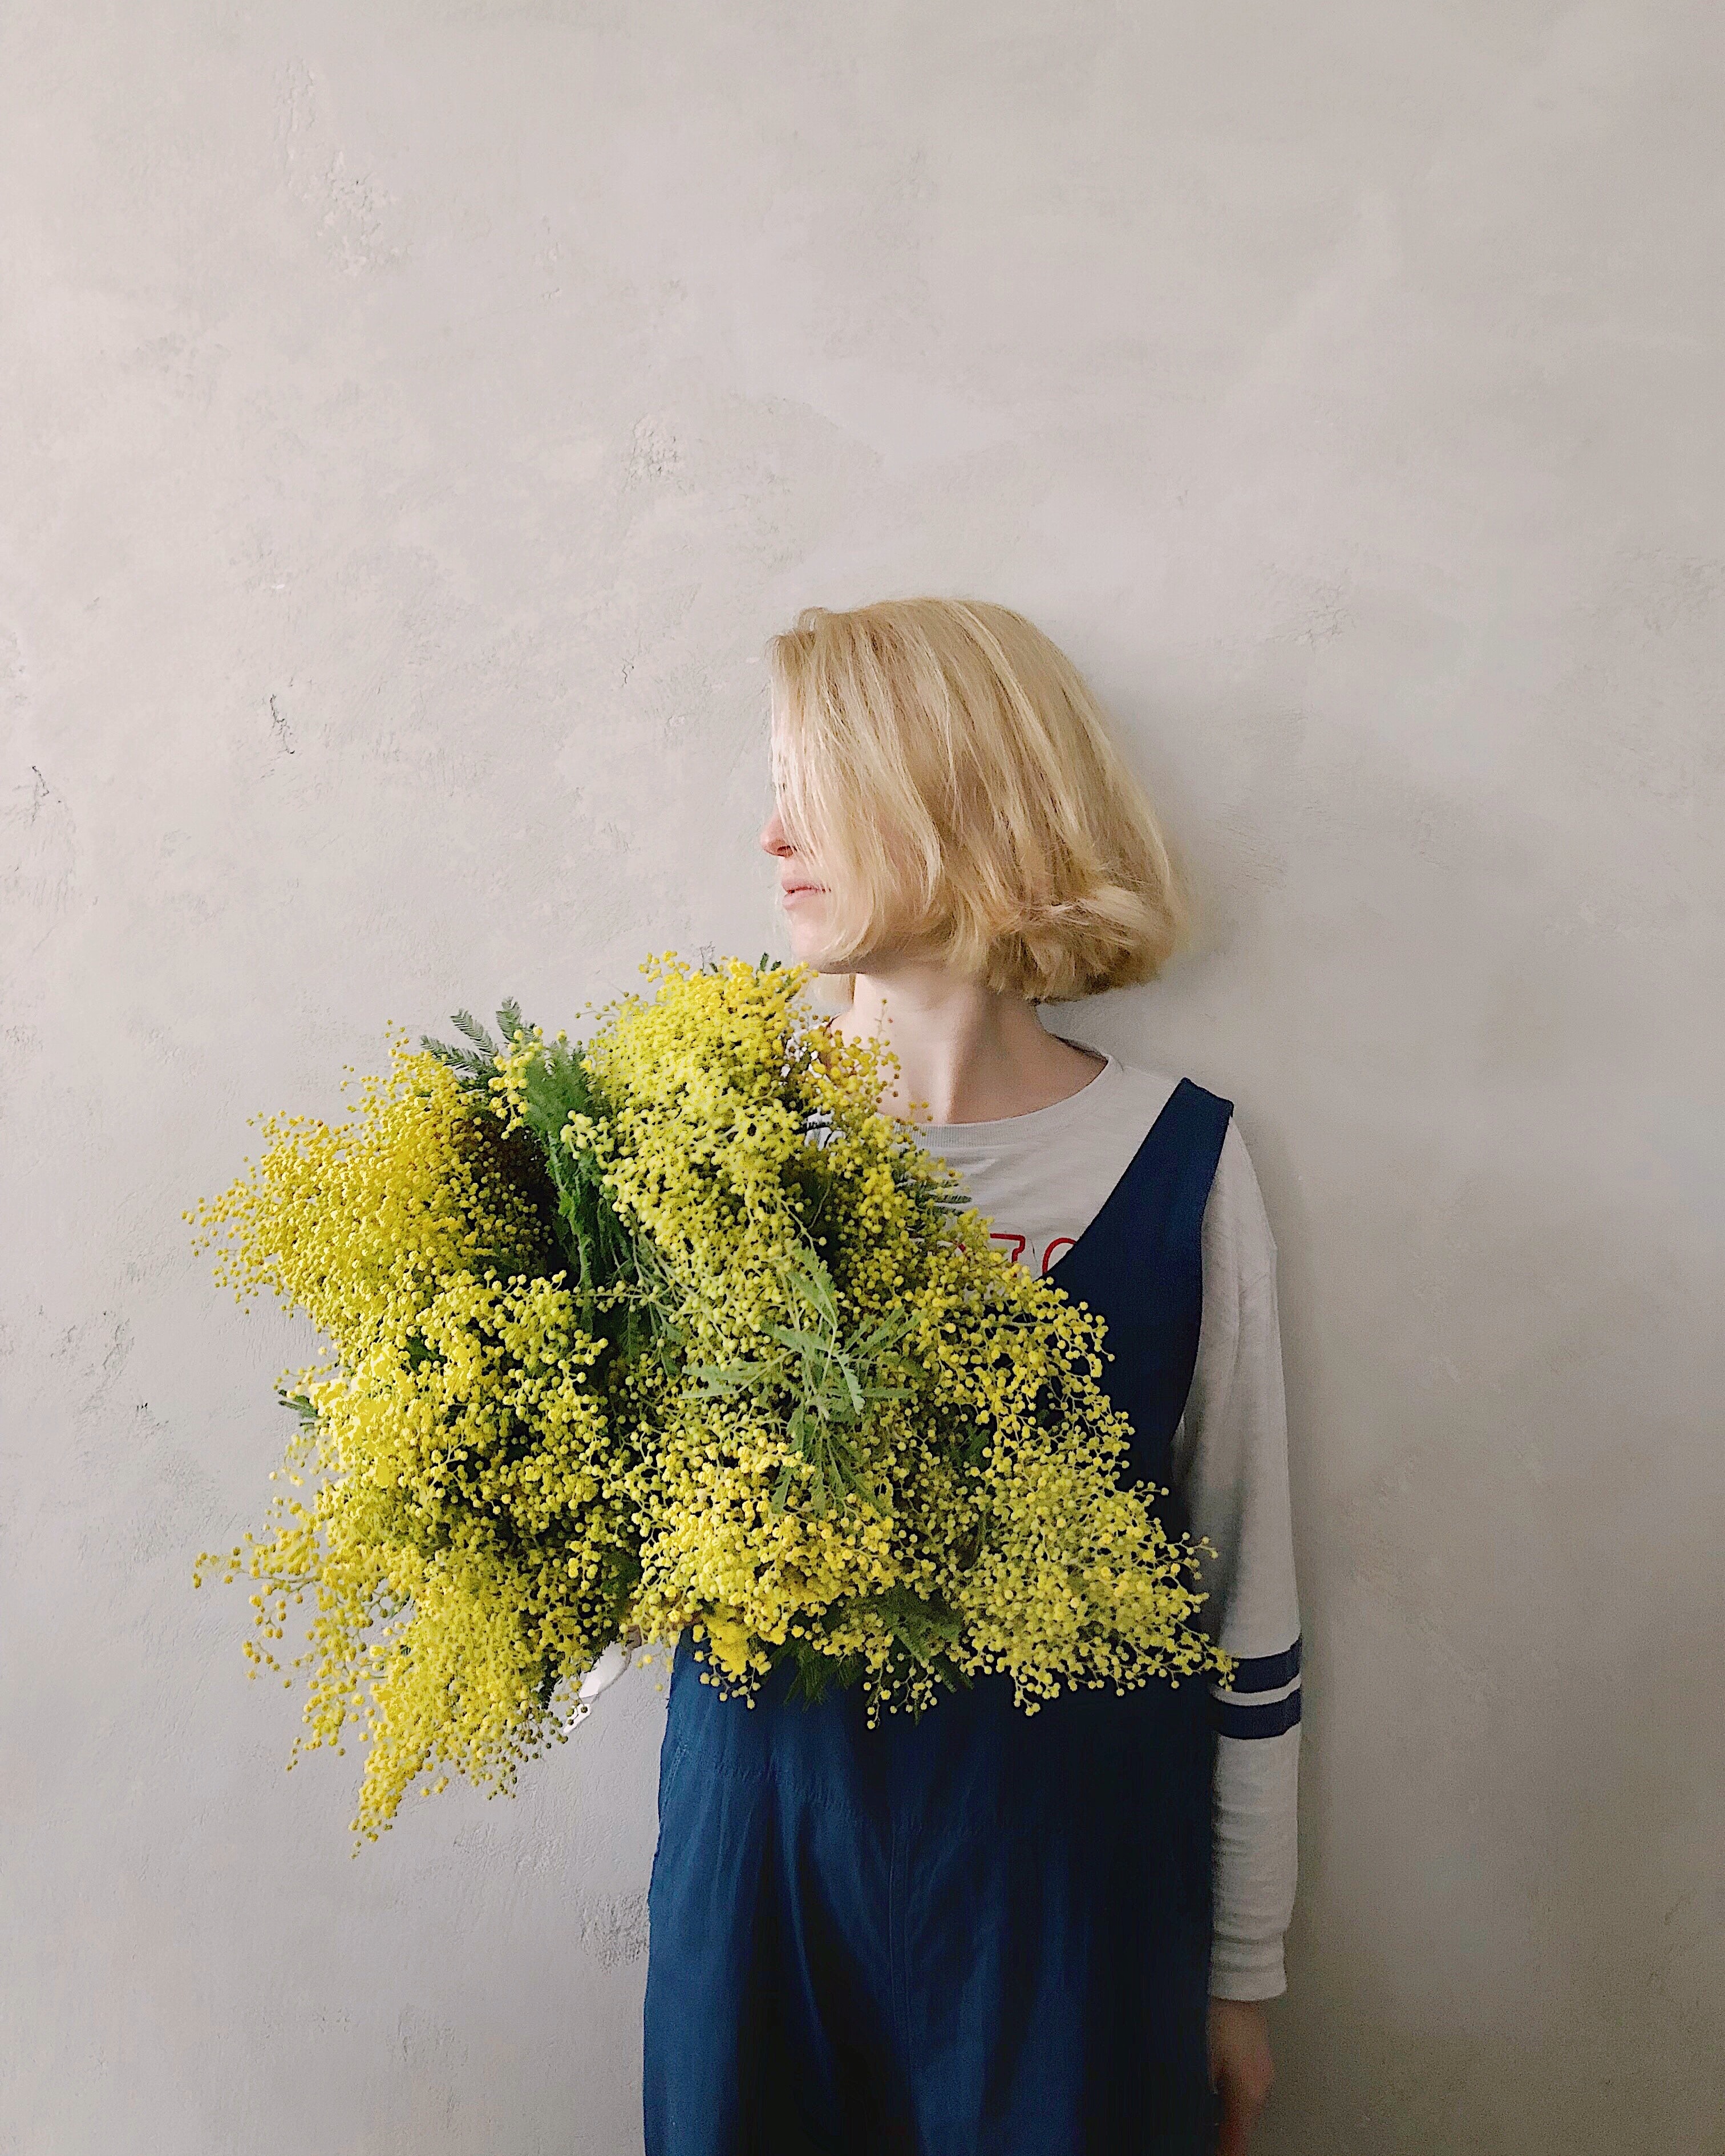 Woman wearing blue v-neck sleeveless top while holding yellow petaled flower photo